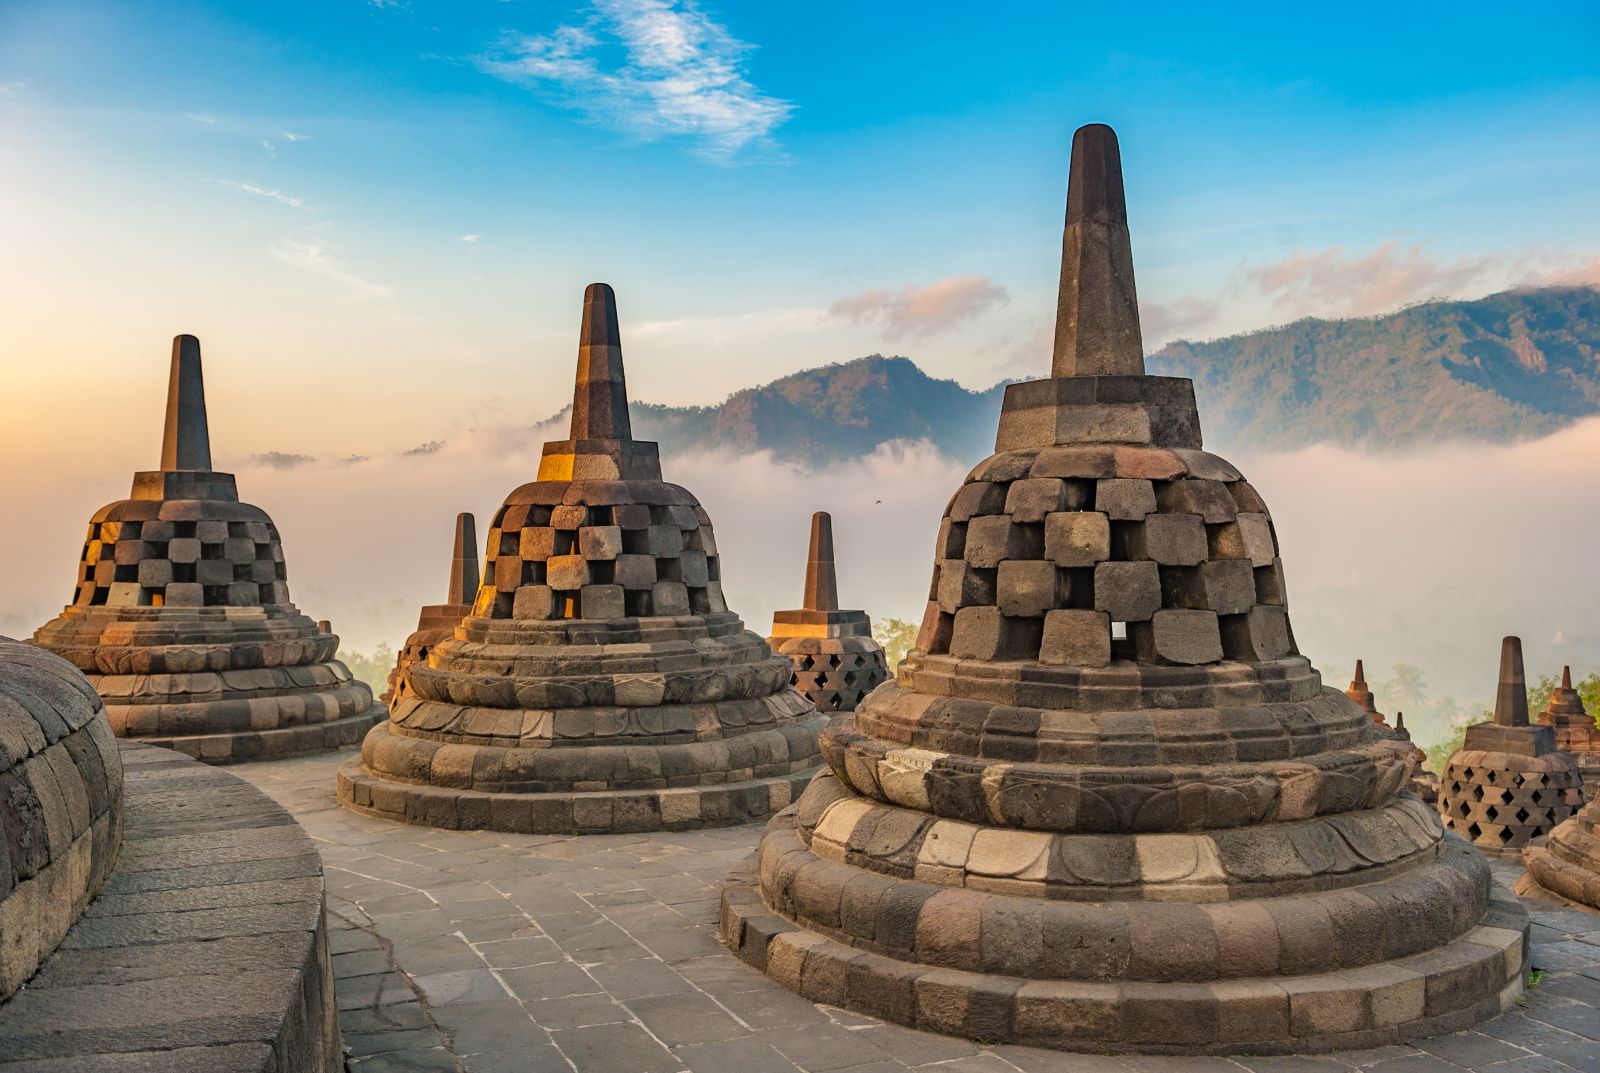 The pagodas of Borobudur in Indonesia in the morning mist